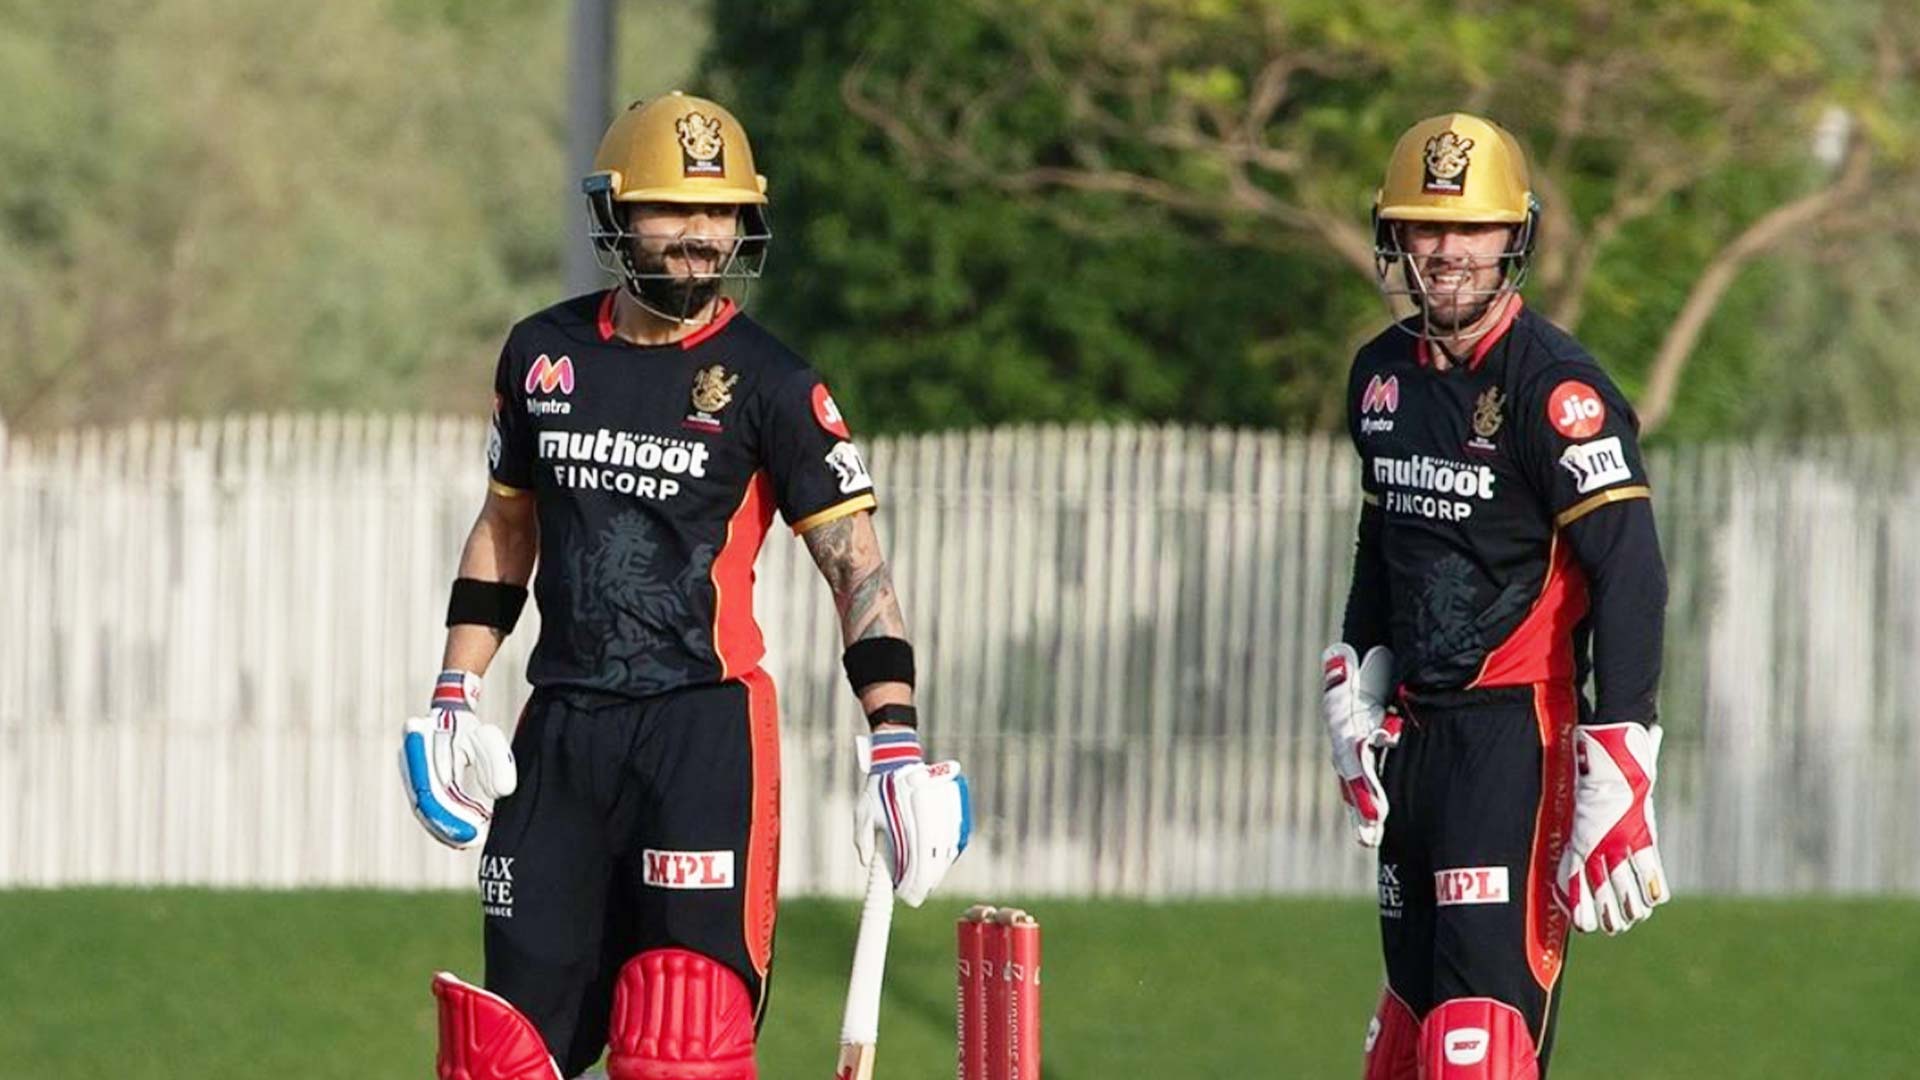 IPL 2020: Highest paid players of the Royal Challengers Bangalore team